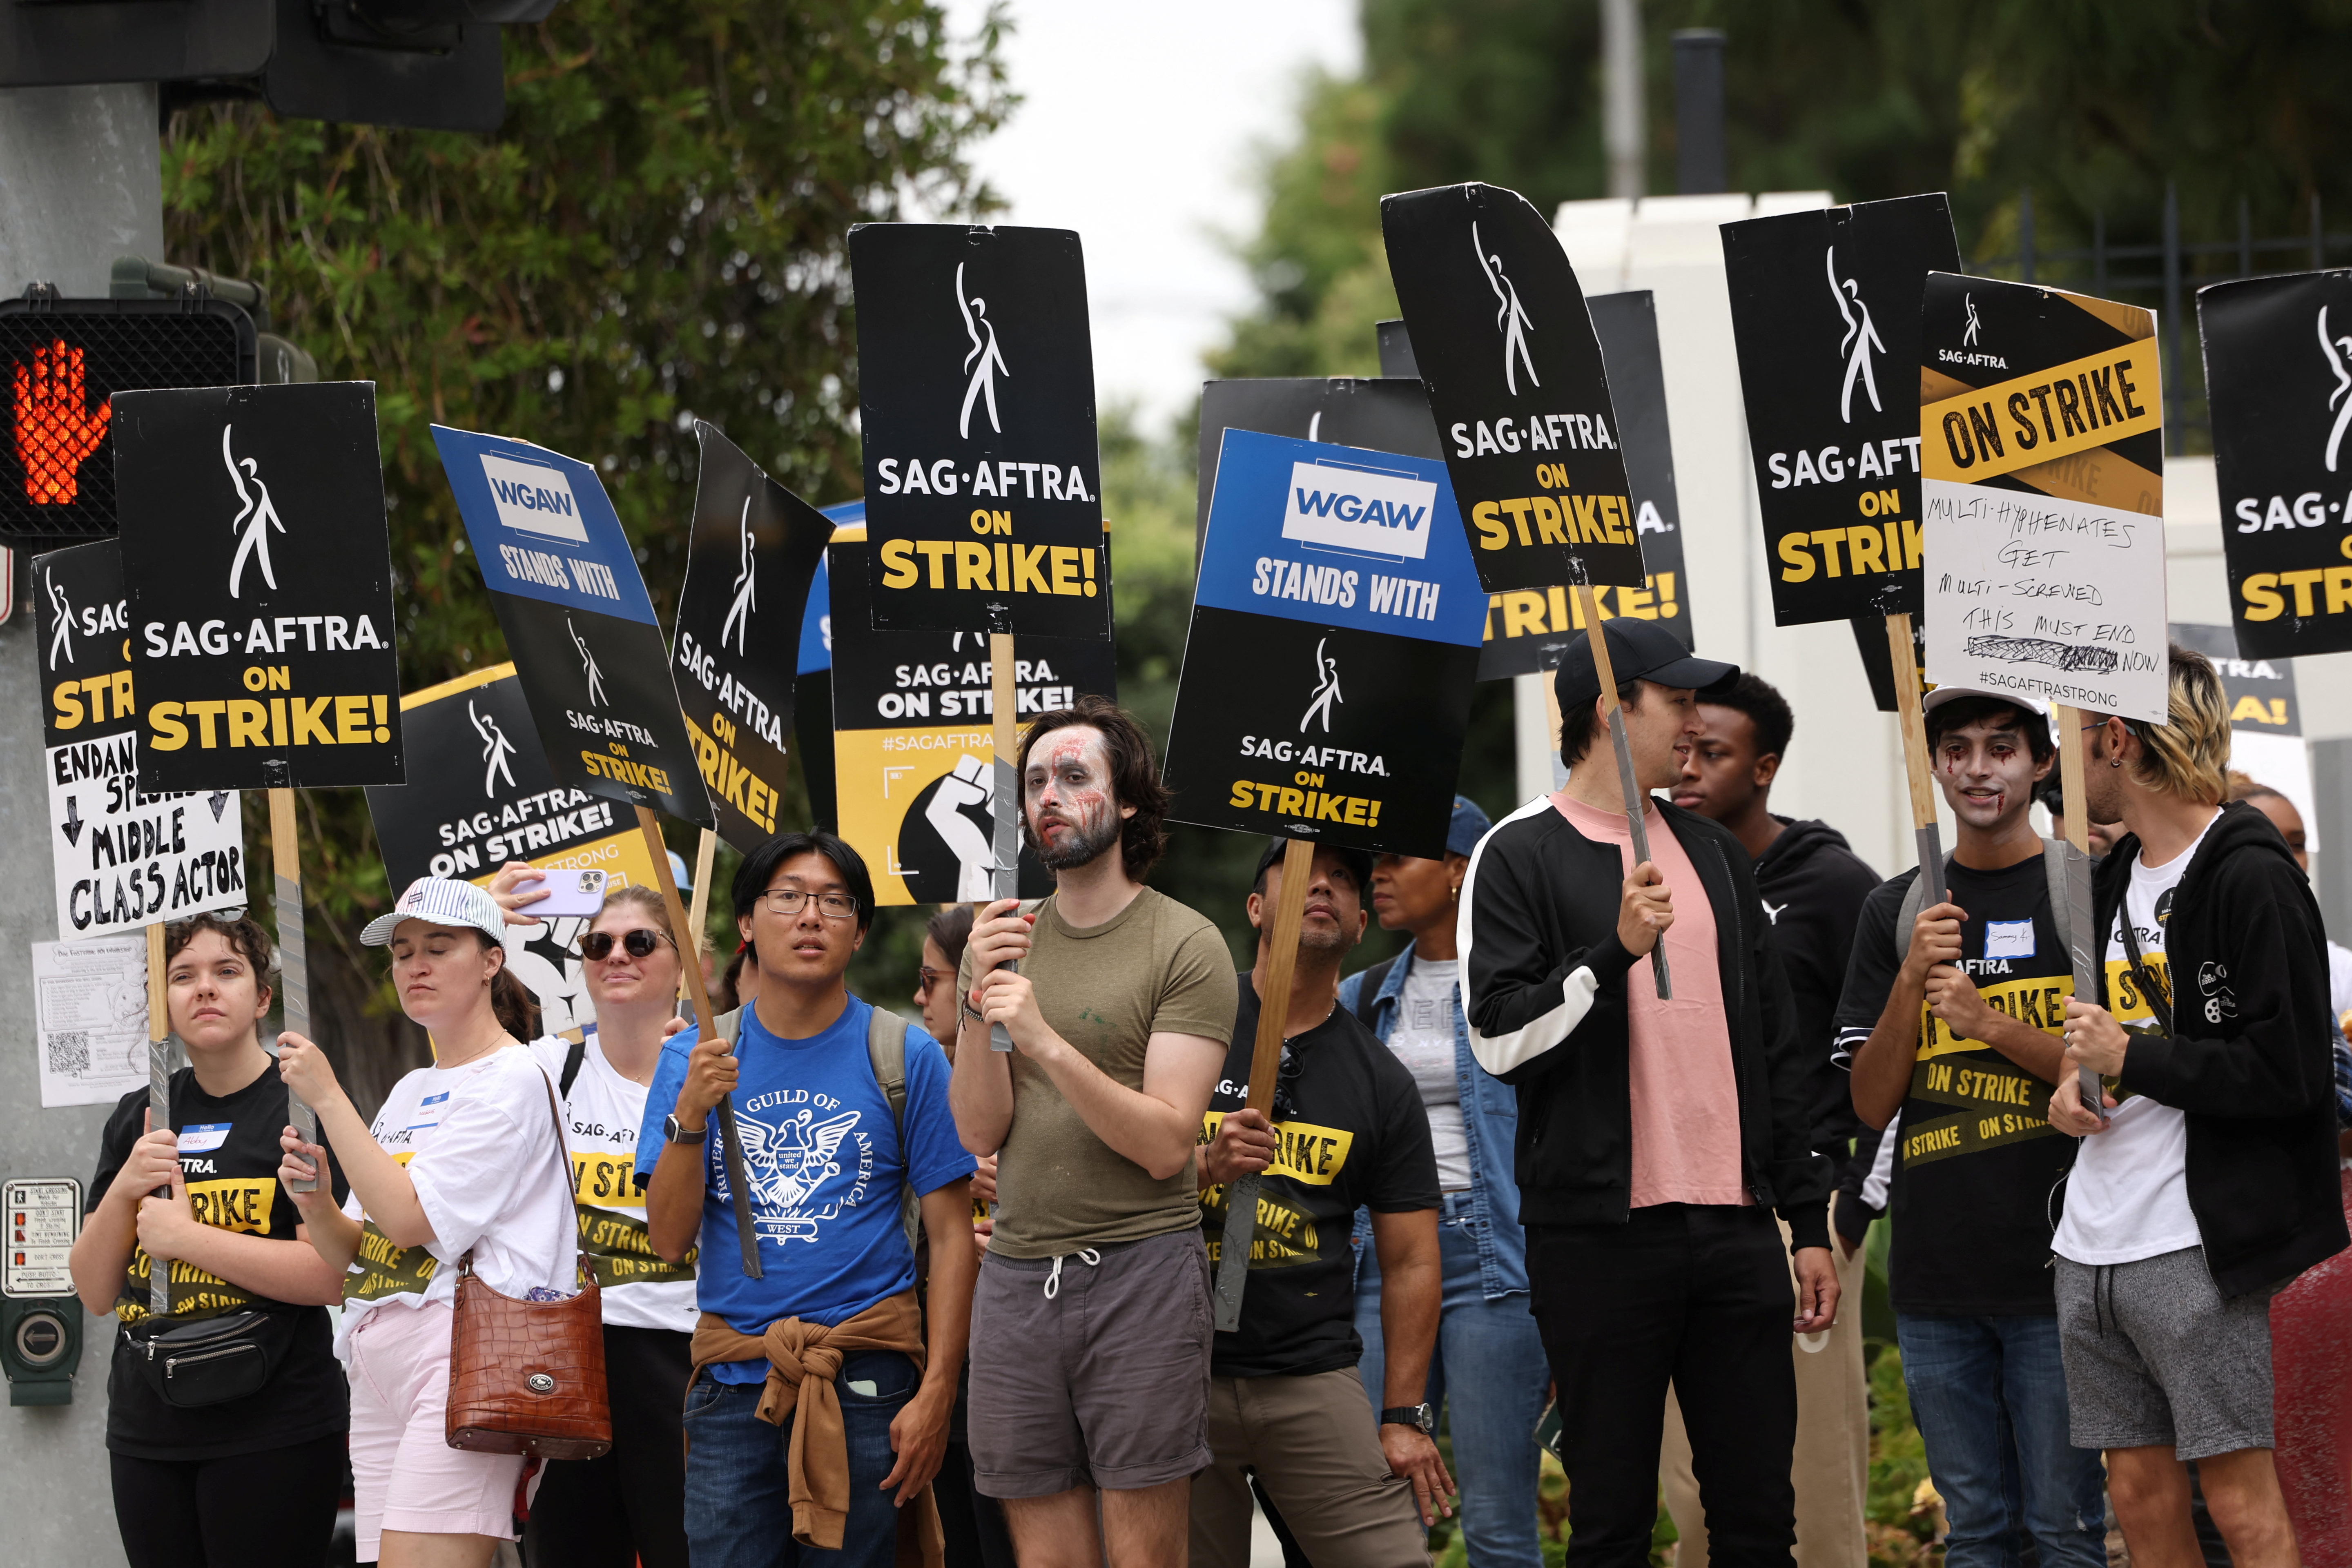 SAG-AFTRA members walk the picket line during their ongoing strike outside Sony Studios in Culver City